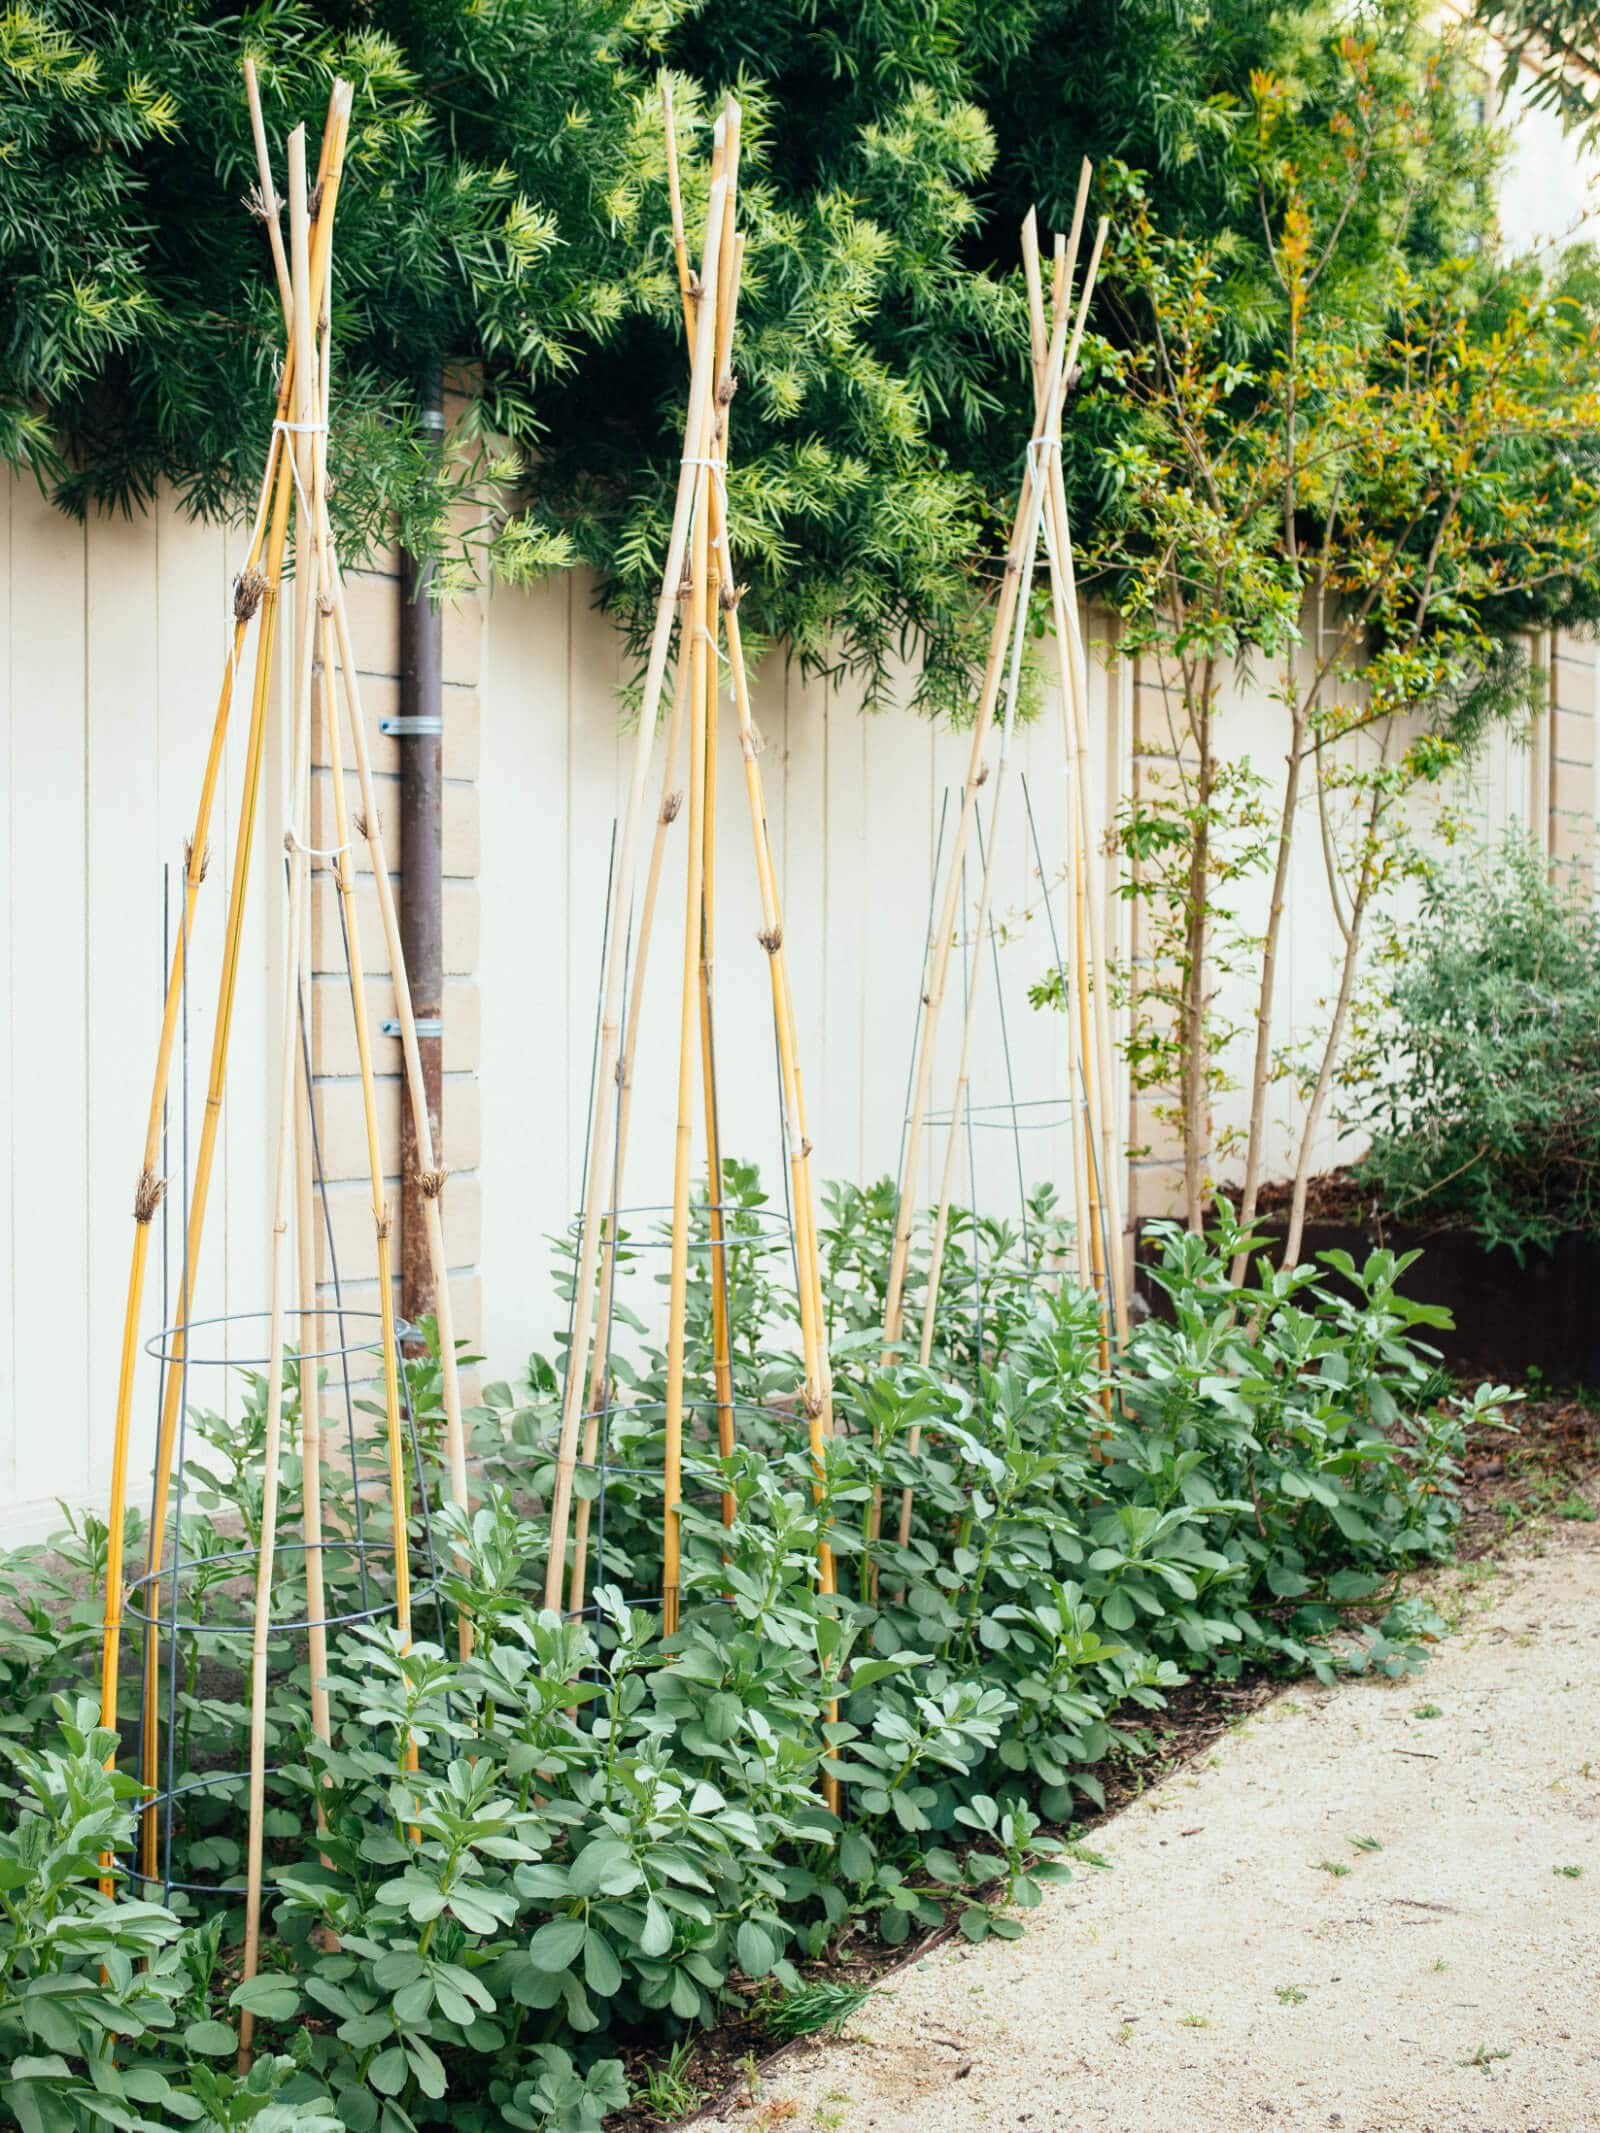 Fava bean plants grow tall and lanky and need support from stakes or cages